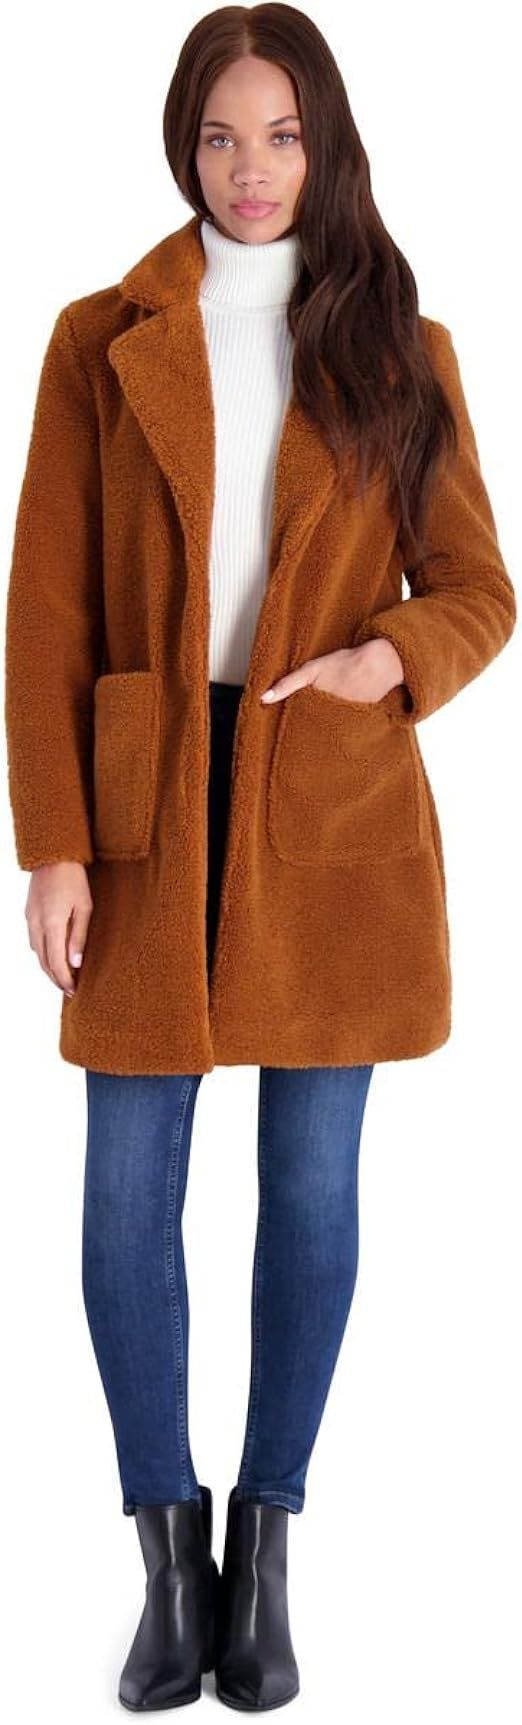 French Connection Teddy Faux Shearling Coat for Women-Open Front Lapel Midi Coat | Amazon (US)